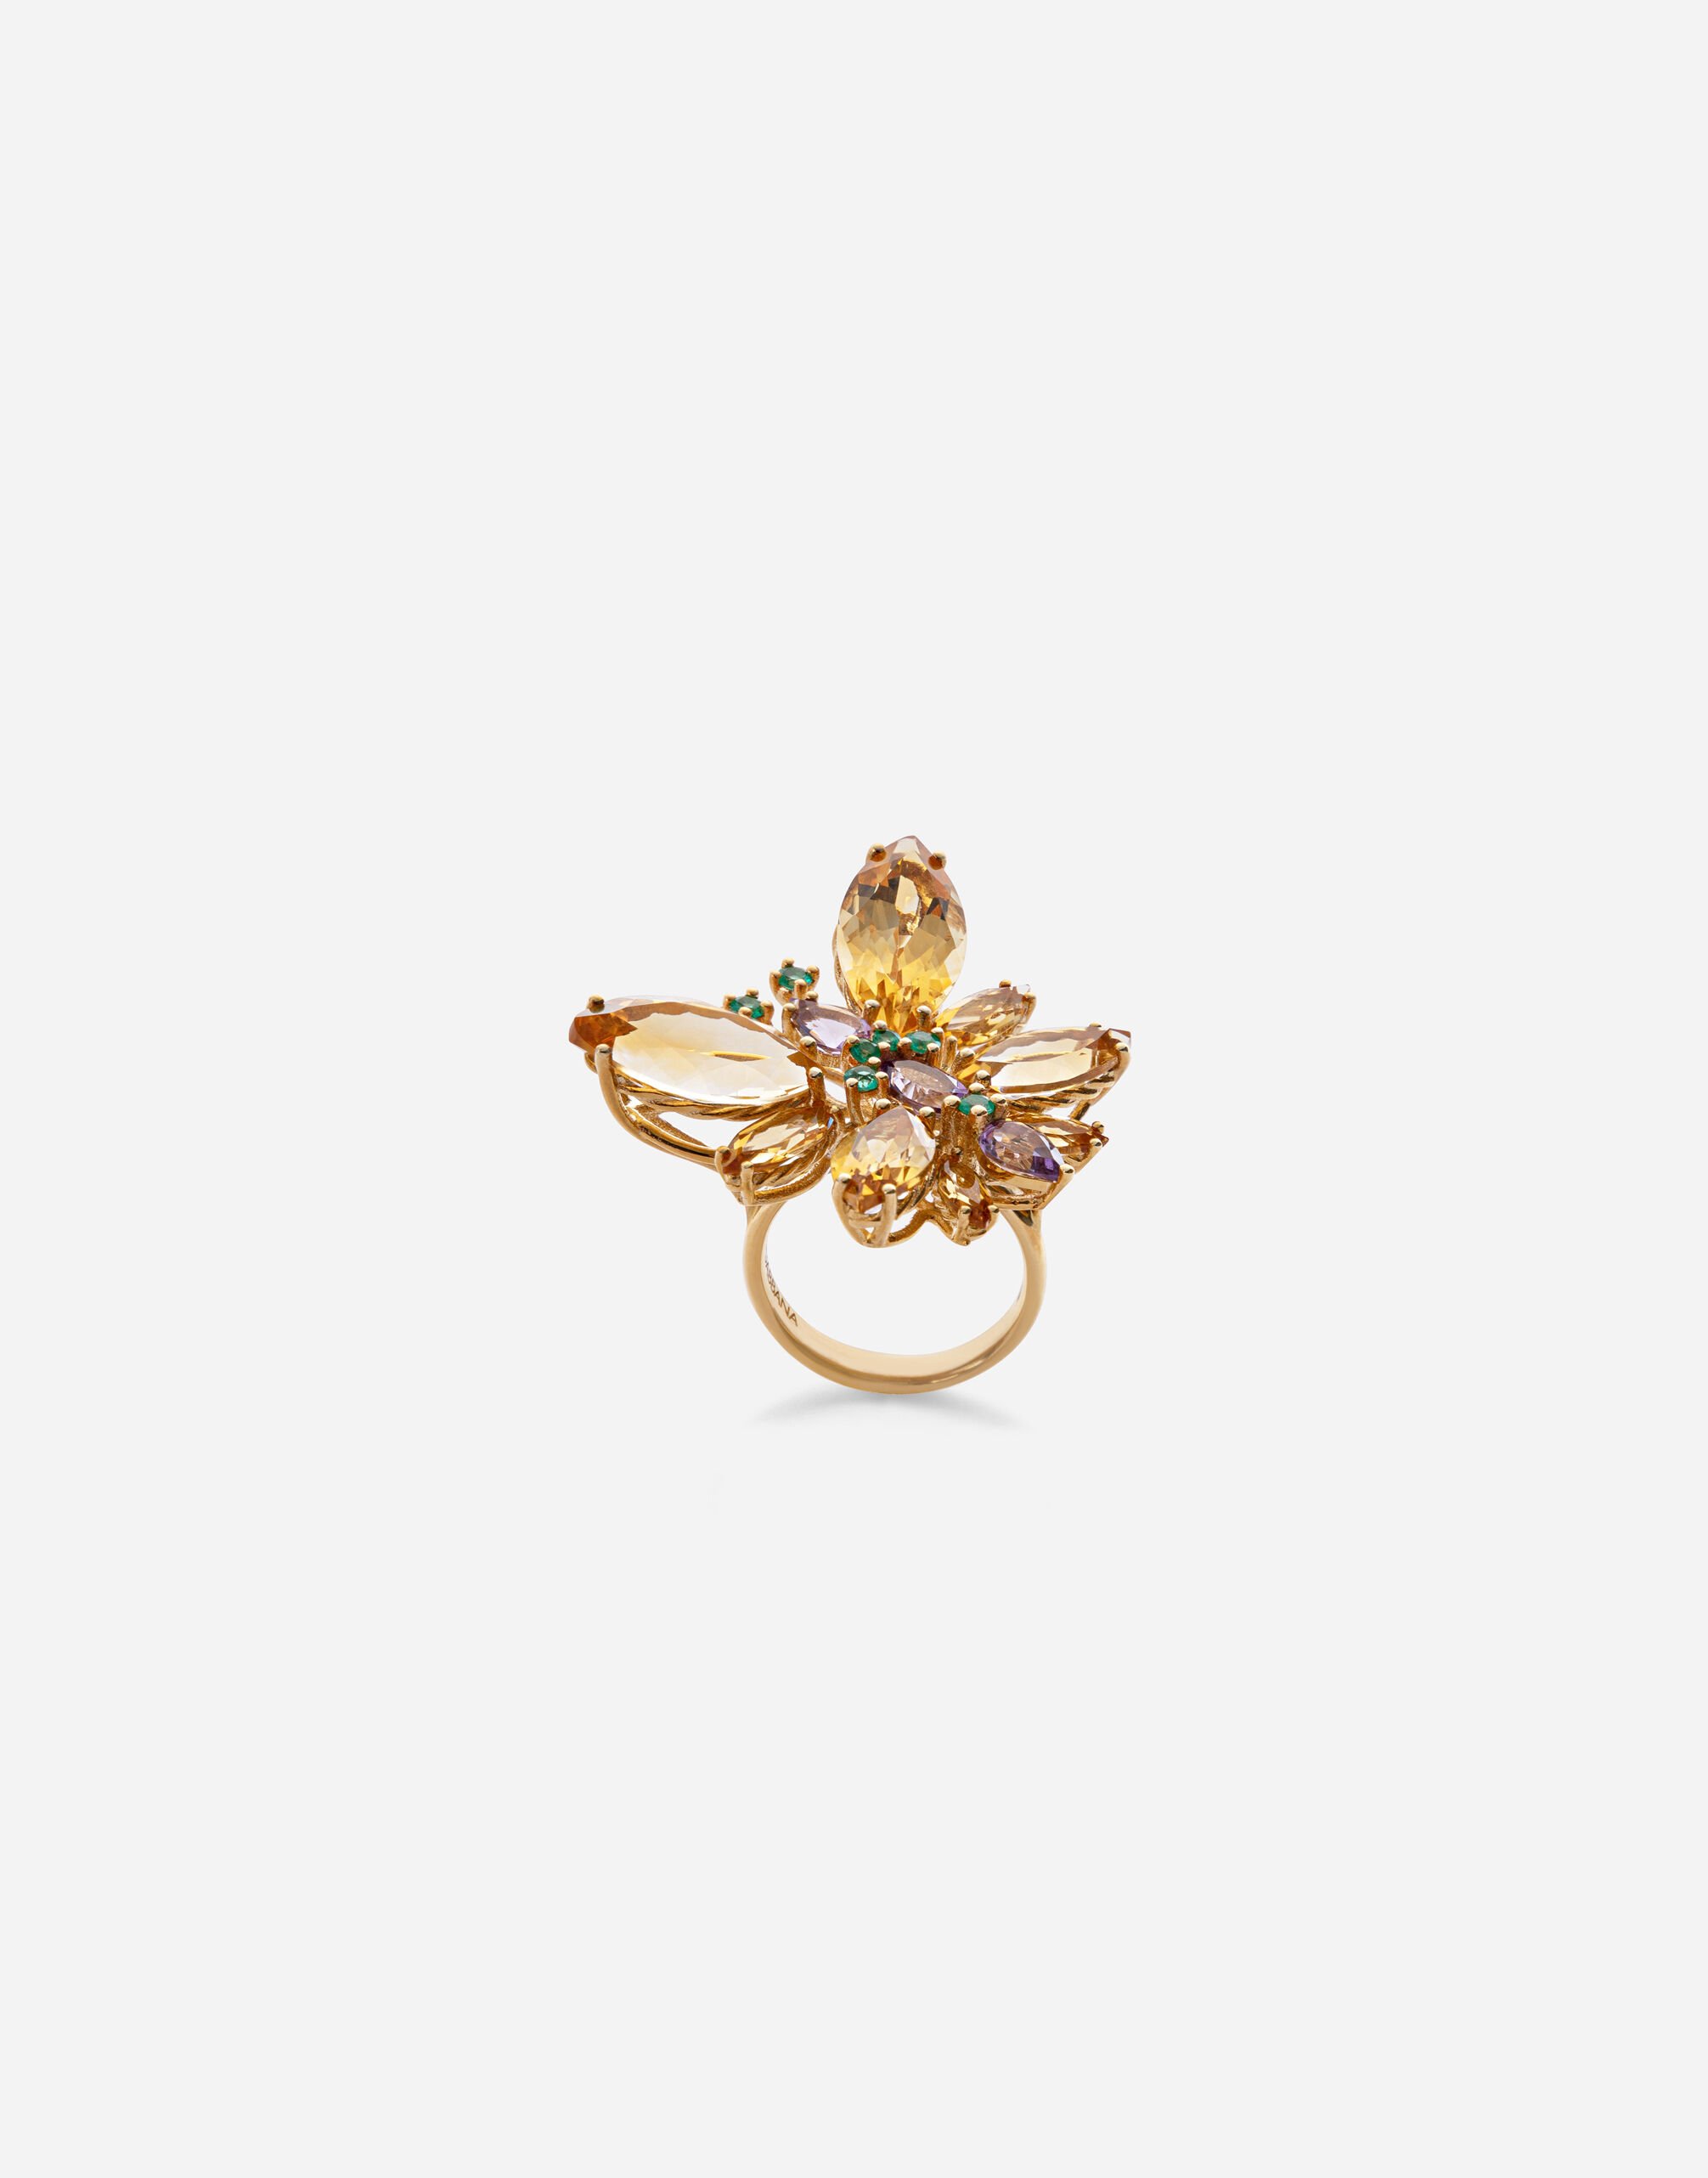 Dolce & Gabbana Spring ring in yellow 18kt gold with citrine butterfly Gold WFHK2GWSAPB